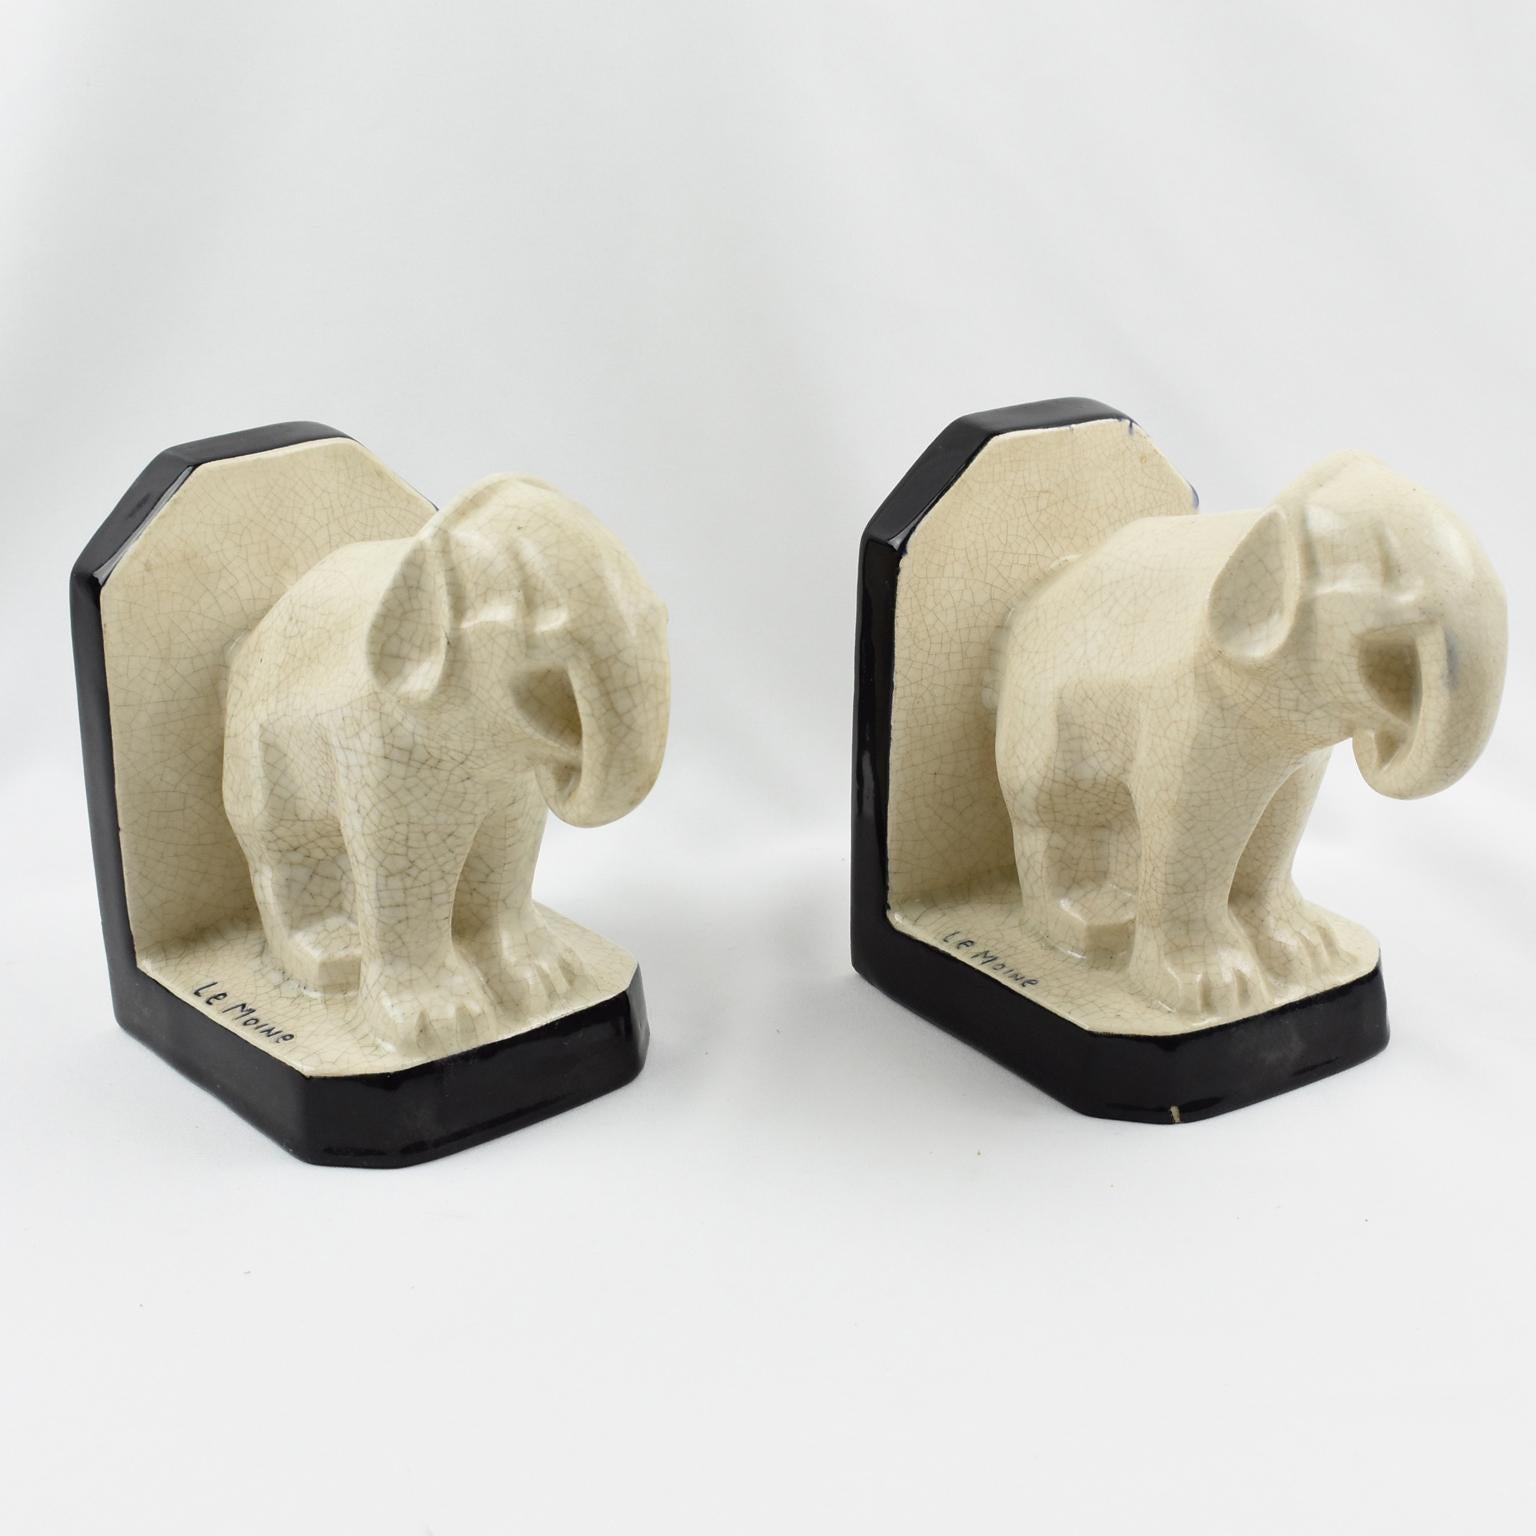 Early 20th Century Art Deco Crackle Ceramic Elephant Sculpture Bookends by Le Moine, France 1930s